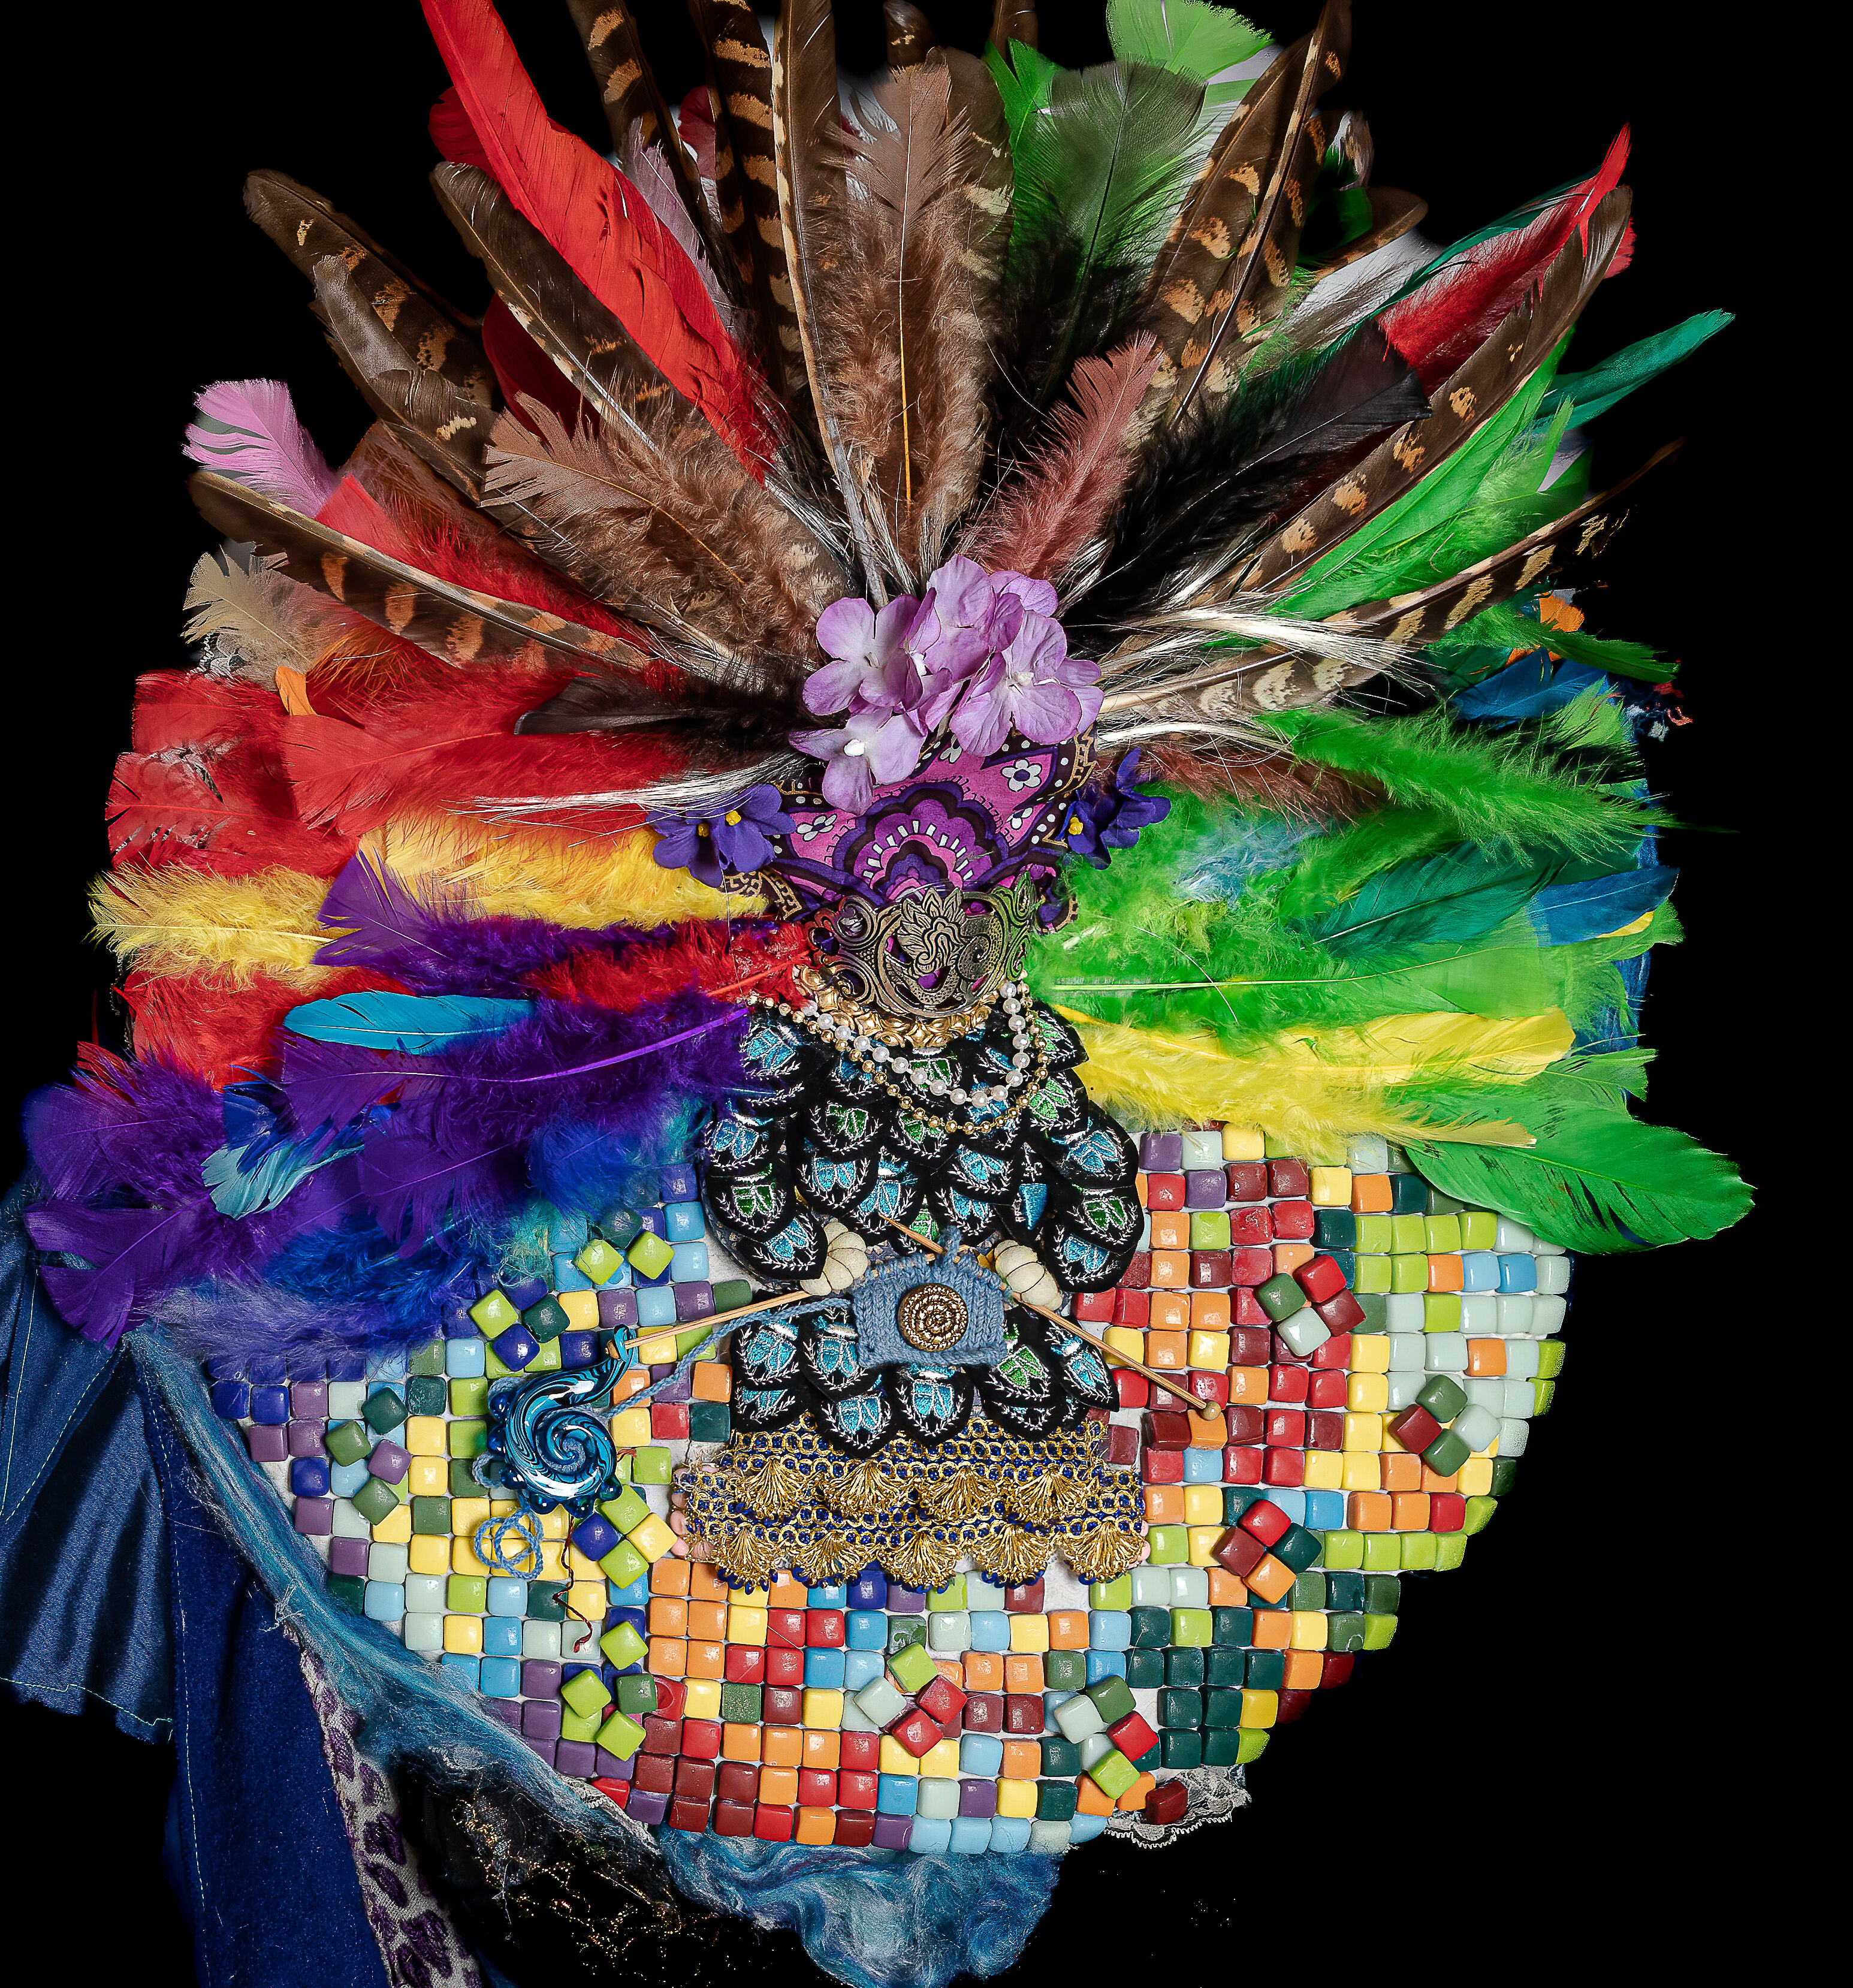 A vibrant carnival headdress featuring a spectrum of colorful feathers, intricate beadwork, and mosaic details on a black background.